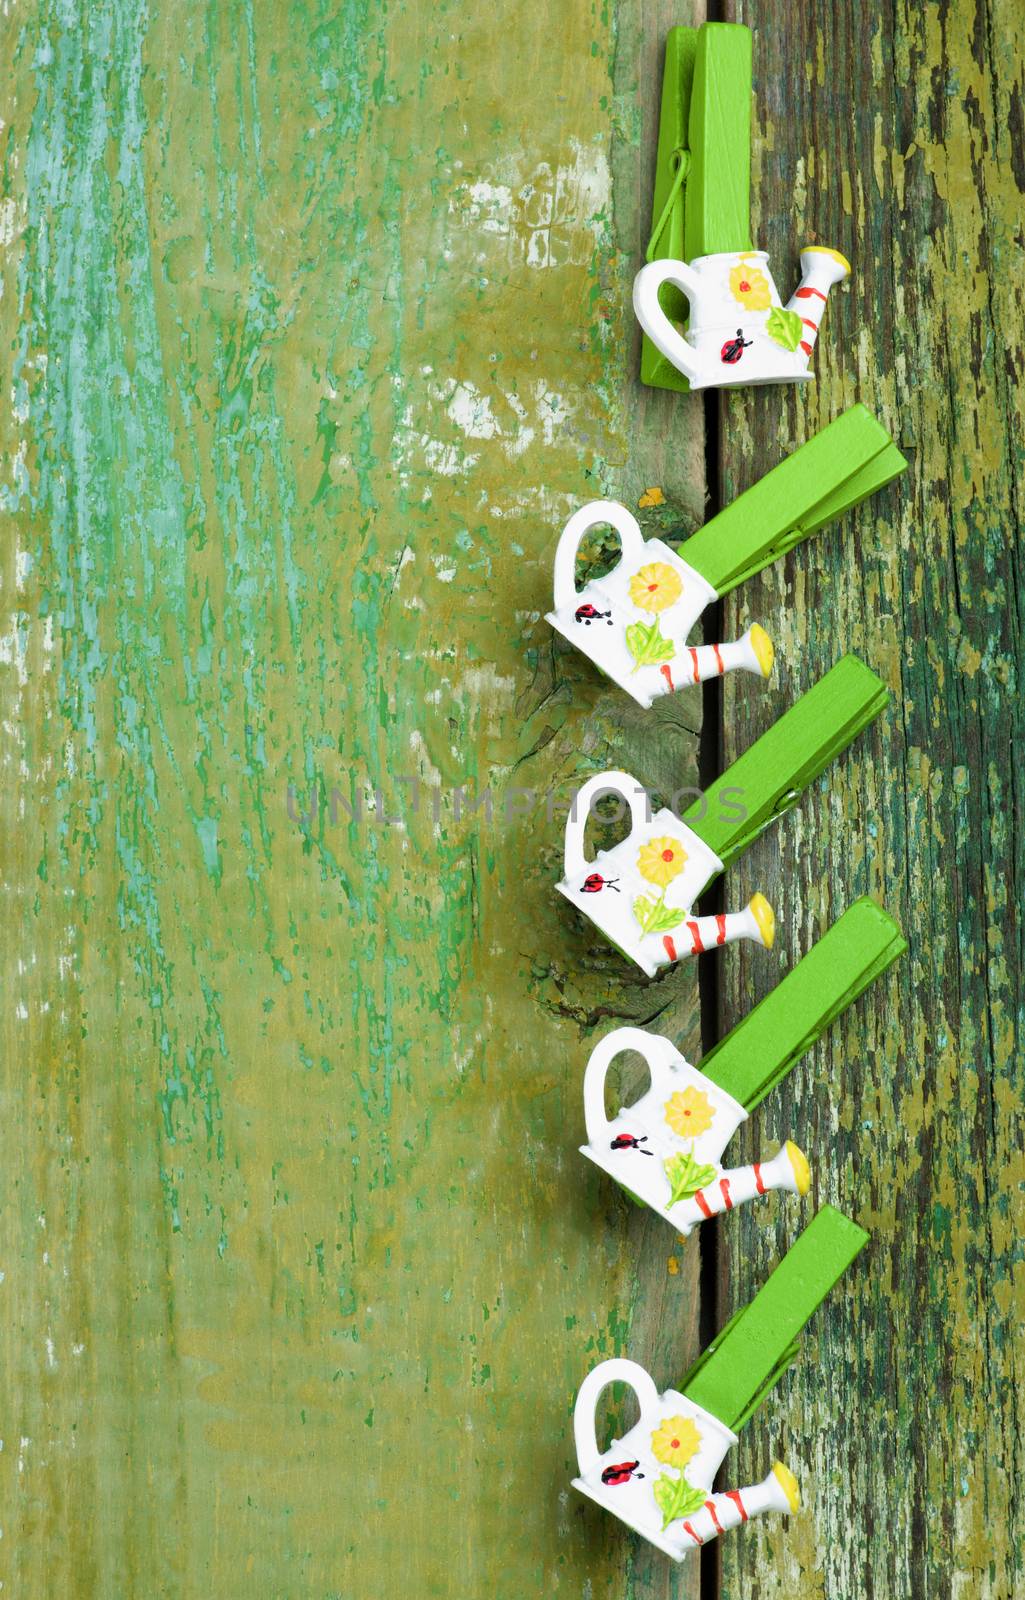 Arrangement of Decorative Gardening and Watering Wooden Pins In a Row on Cracked Green Wooden background